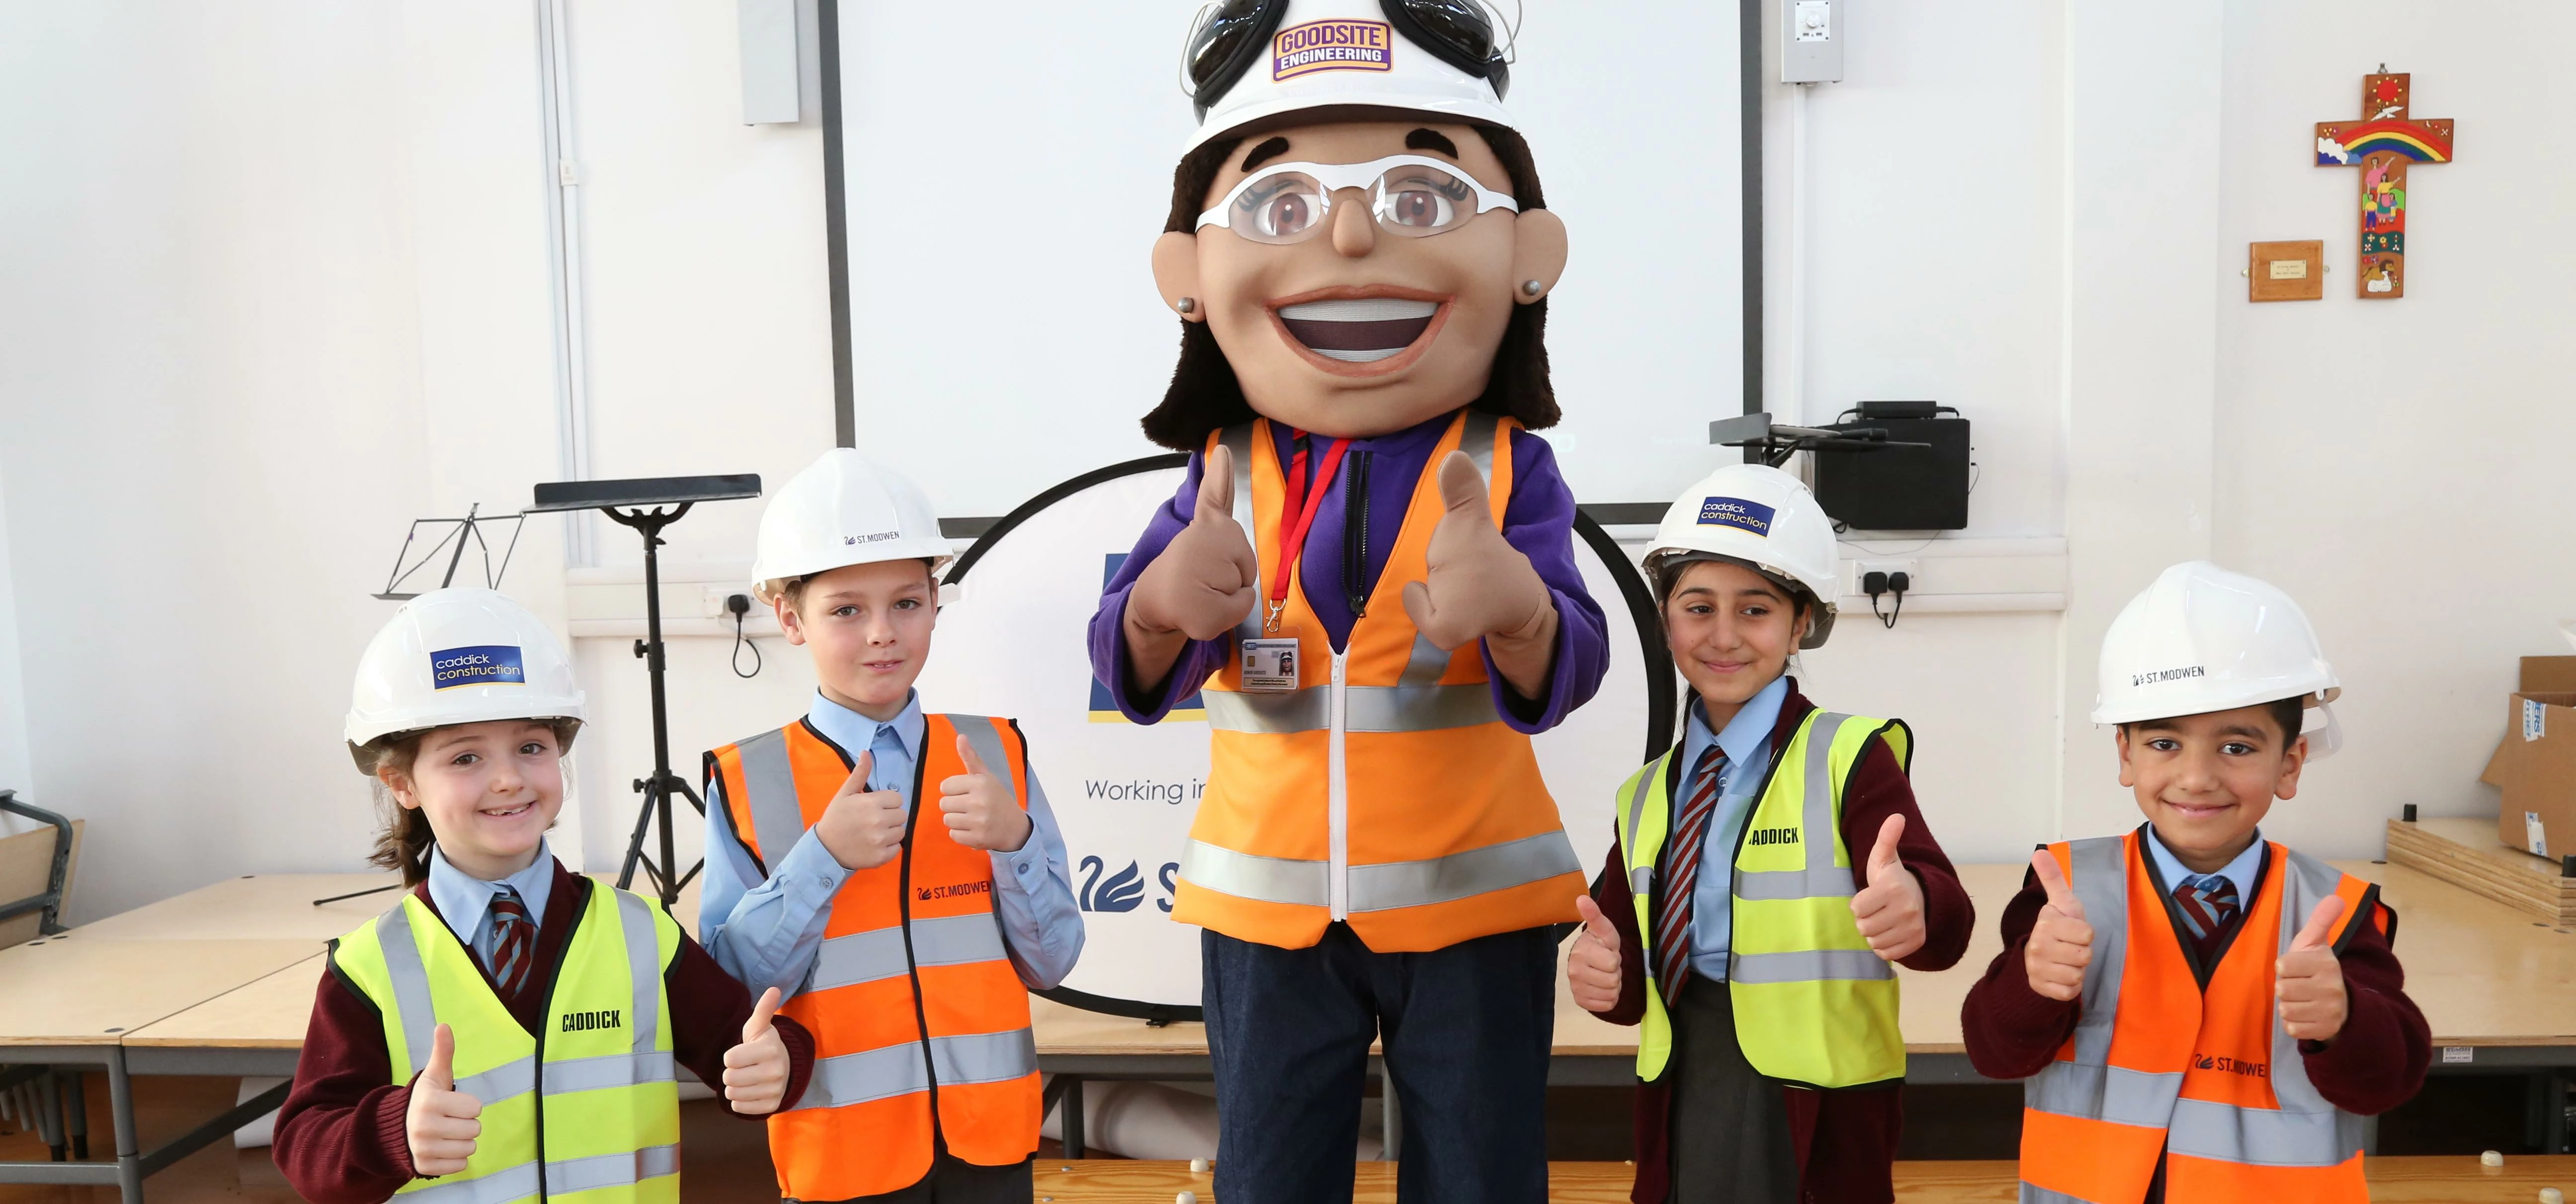 Honor Goodsite giving a lesson in site safety to children from Faith Primary School. 